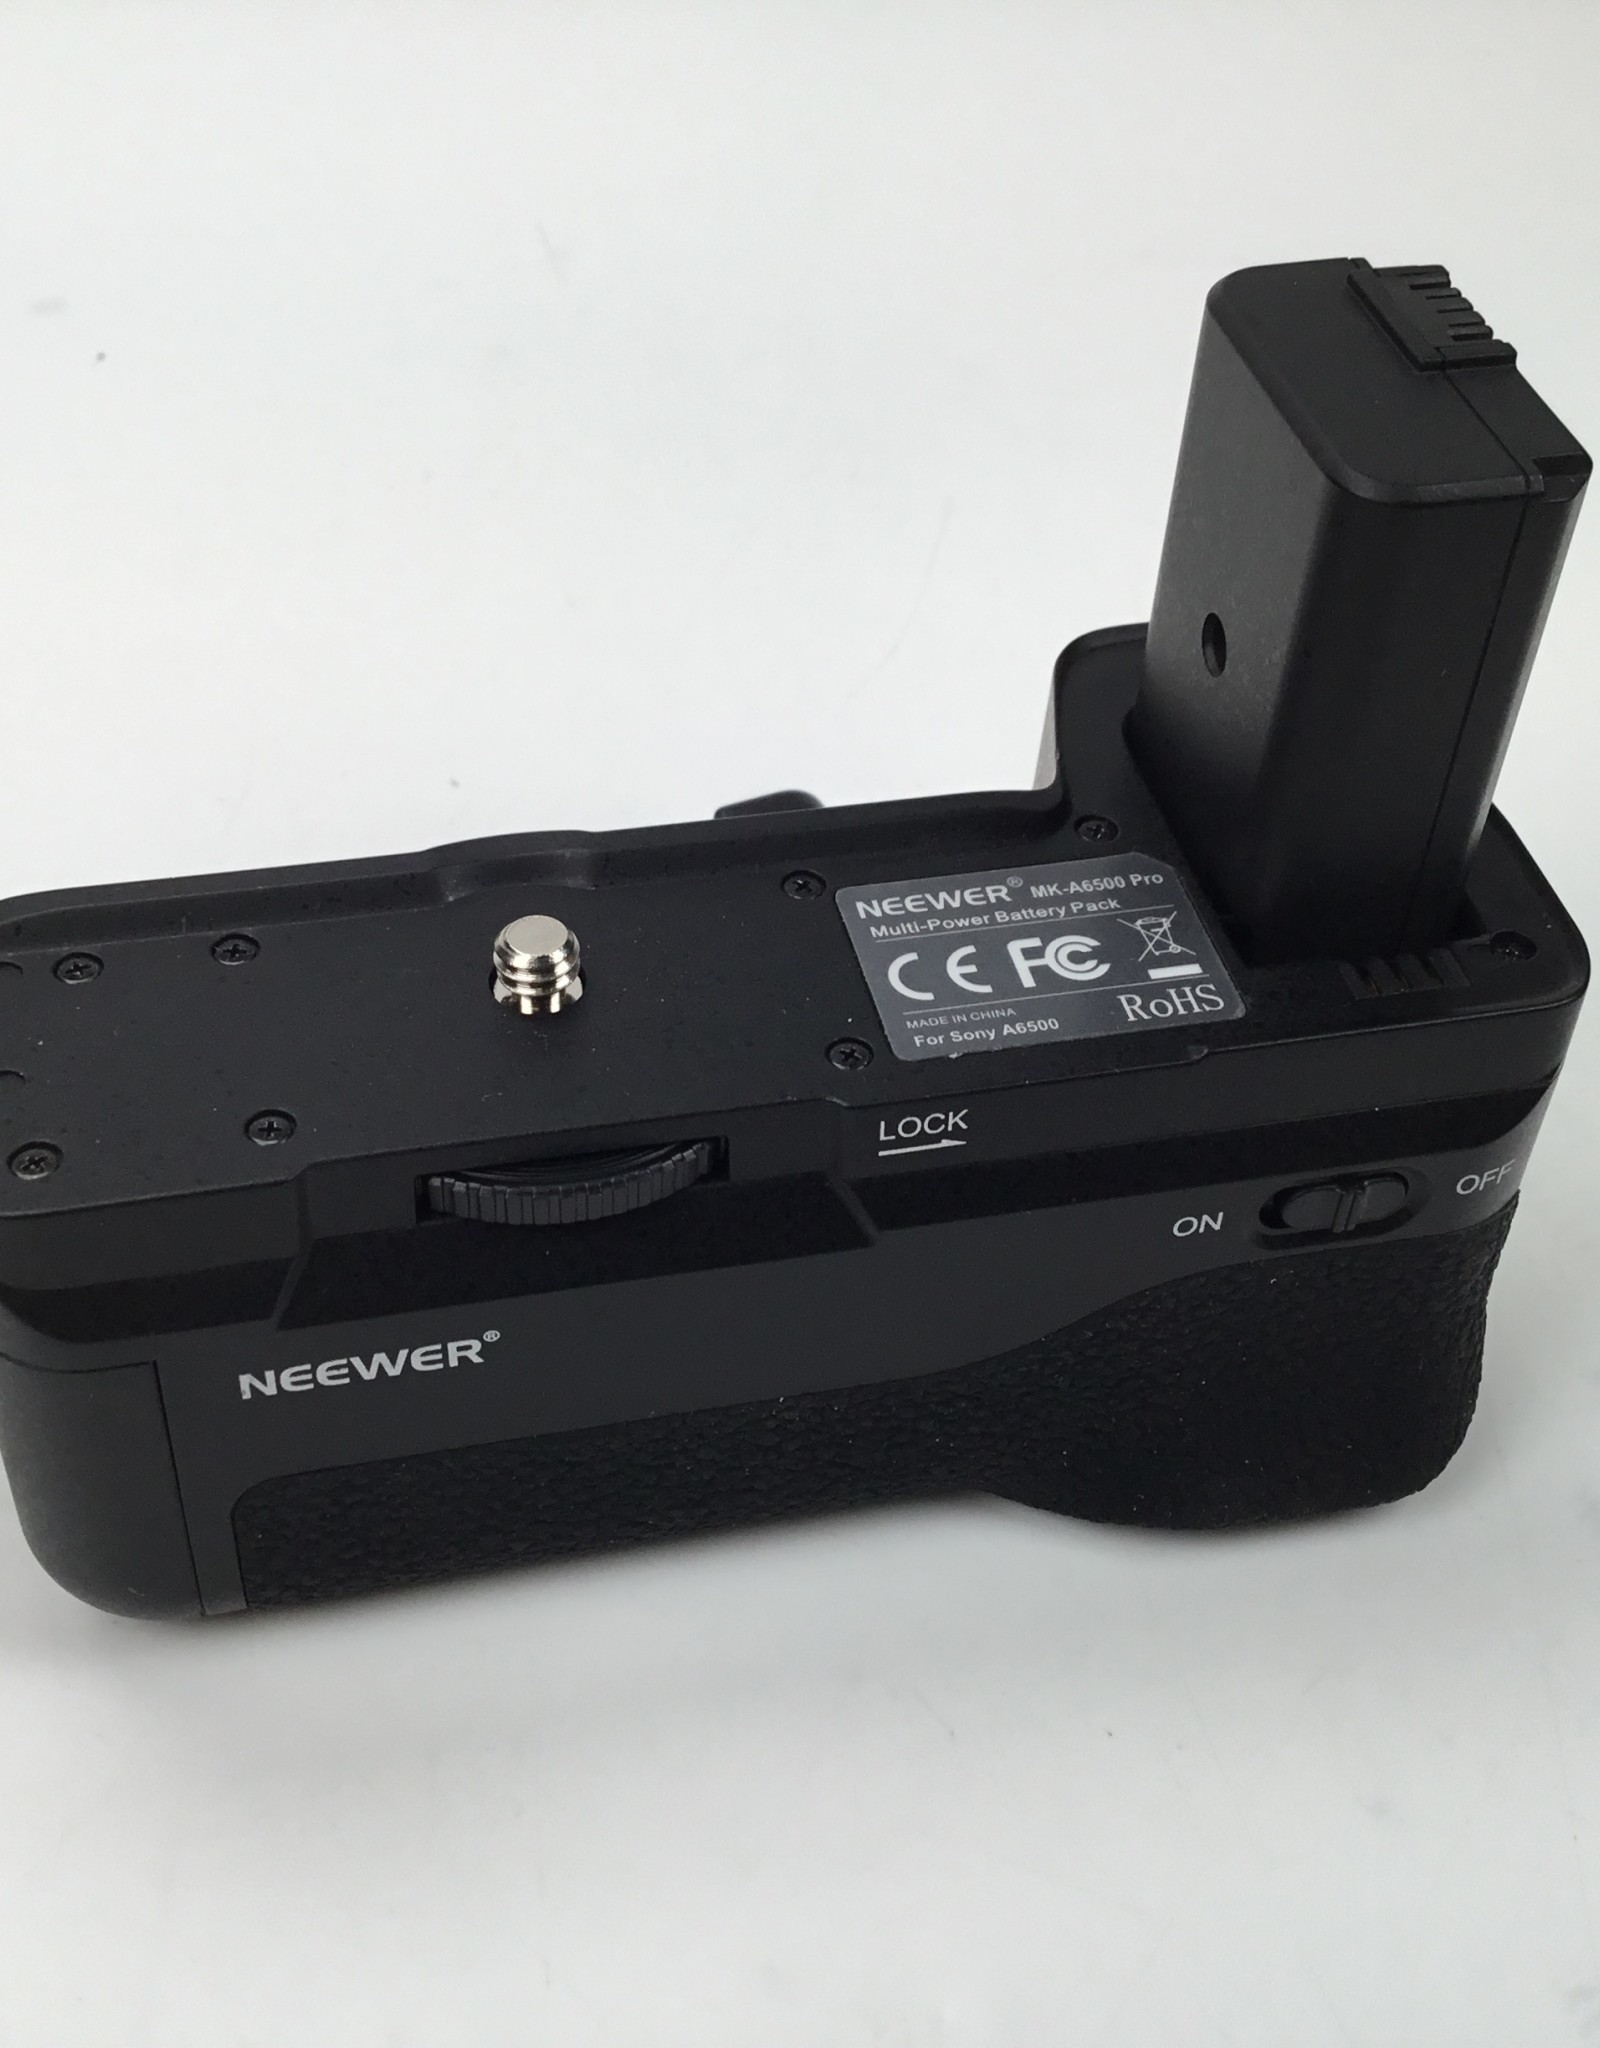 SONY Neewer MK-A6500 Battery Grip for Sony a6500 Used Good